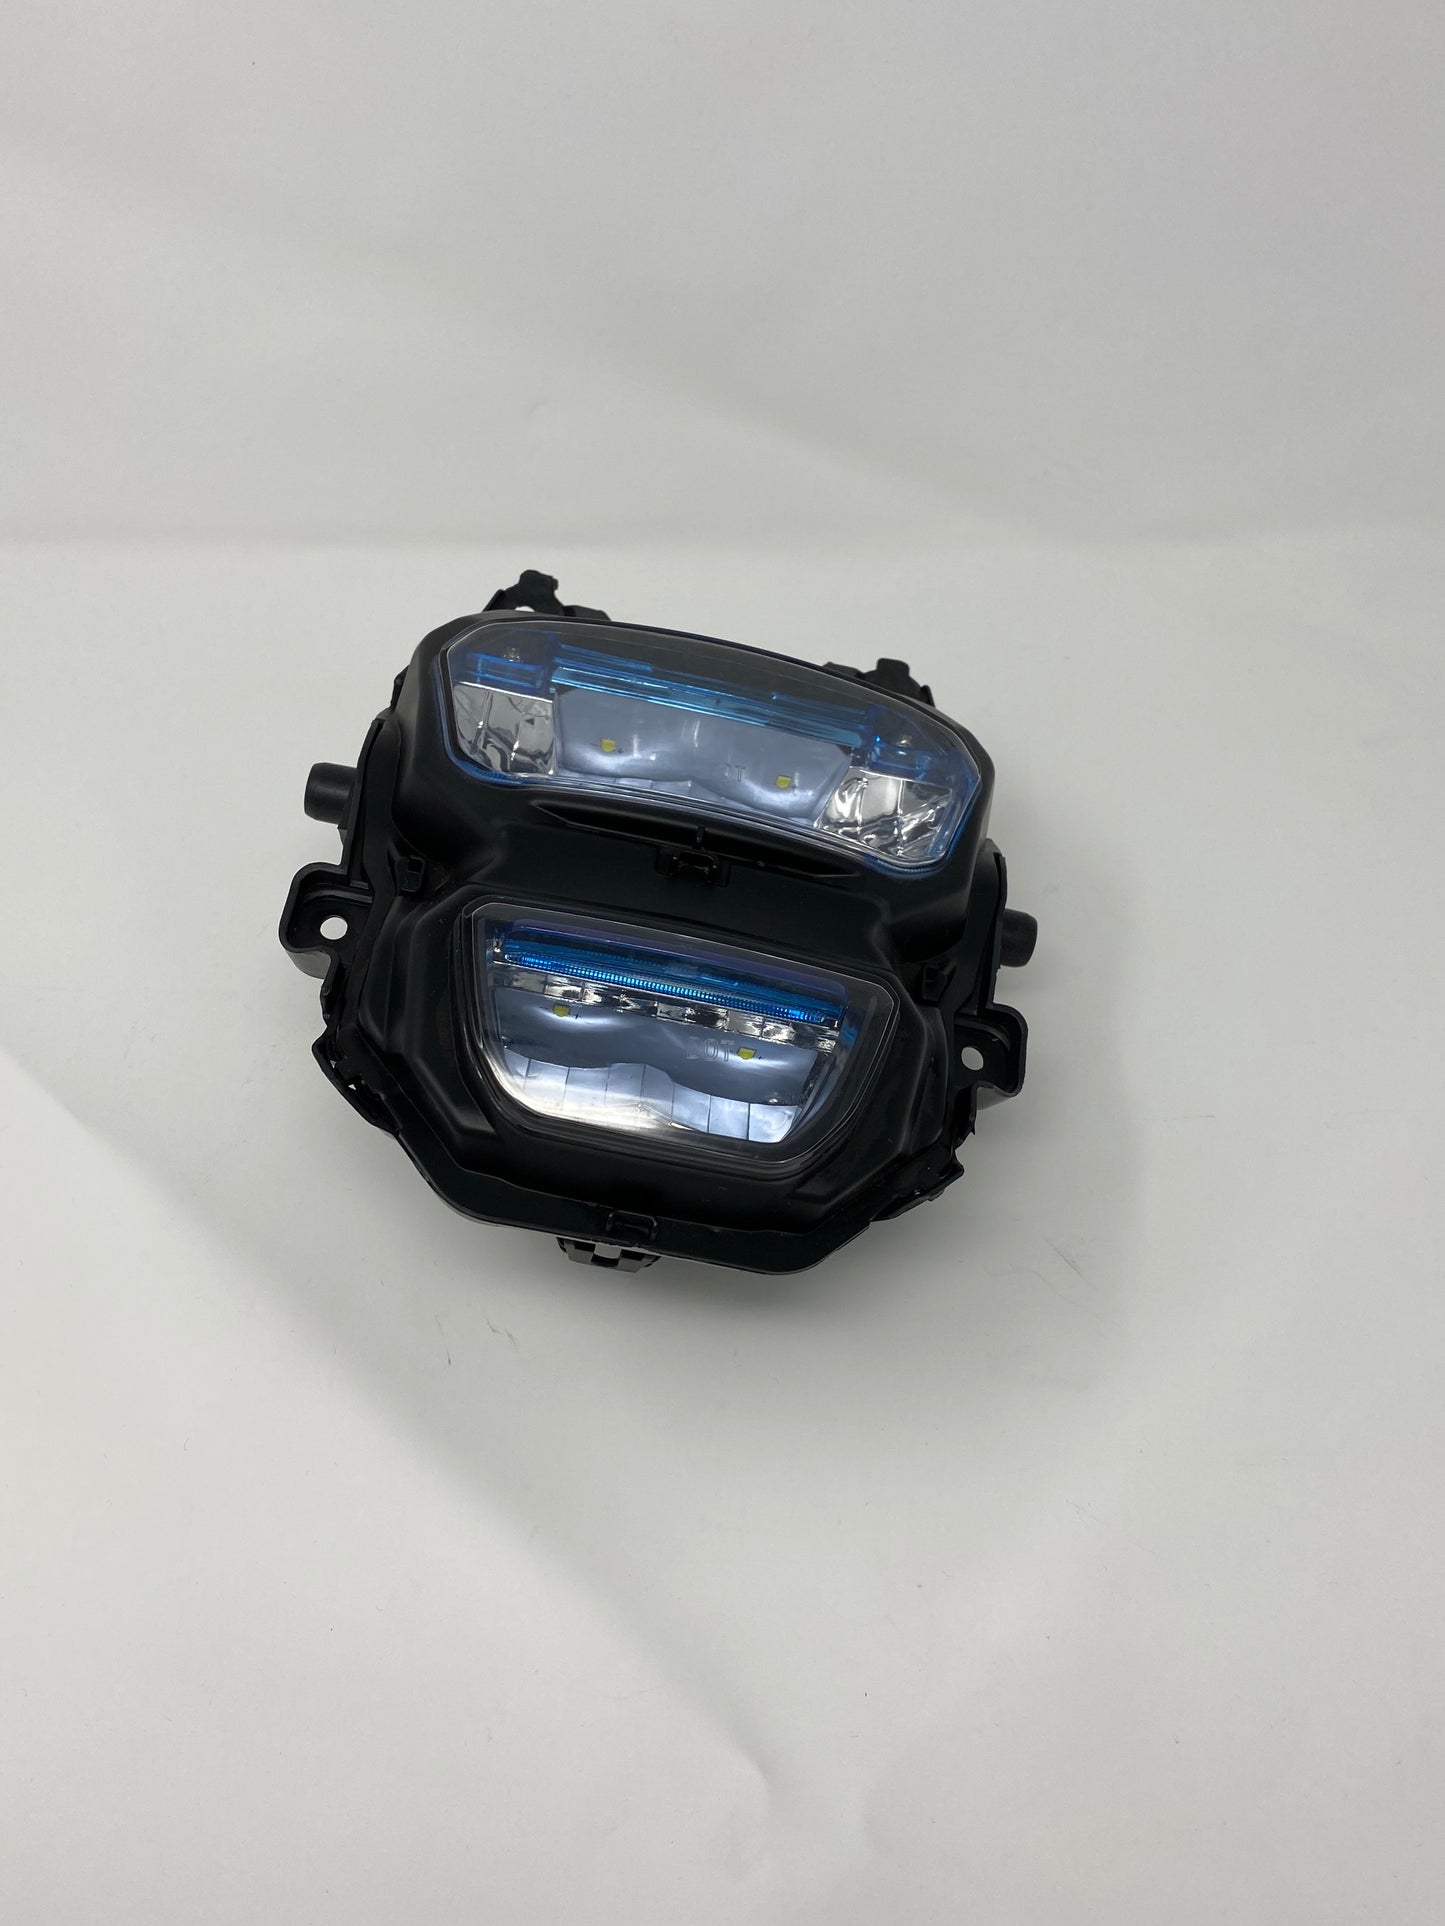 Headlight Assembly for BD125-10 | Vader 125cc Gen II Complete Headlight